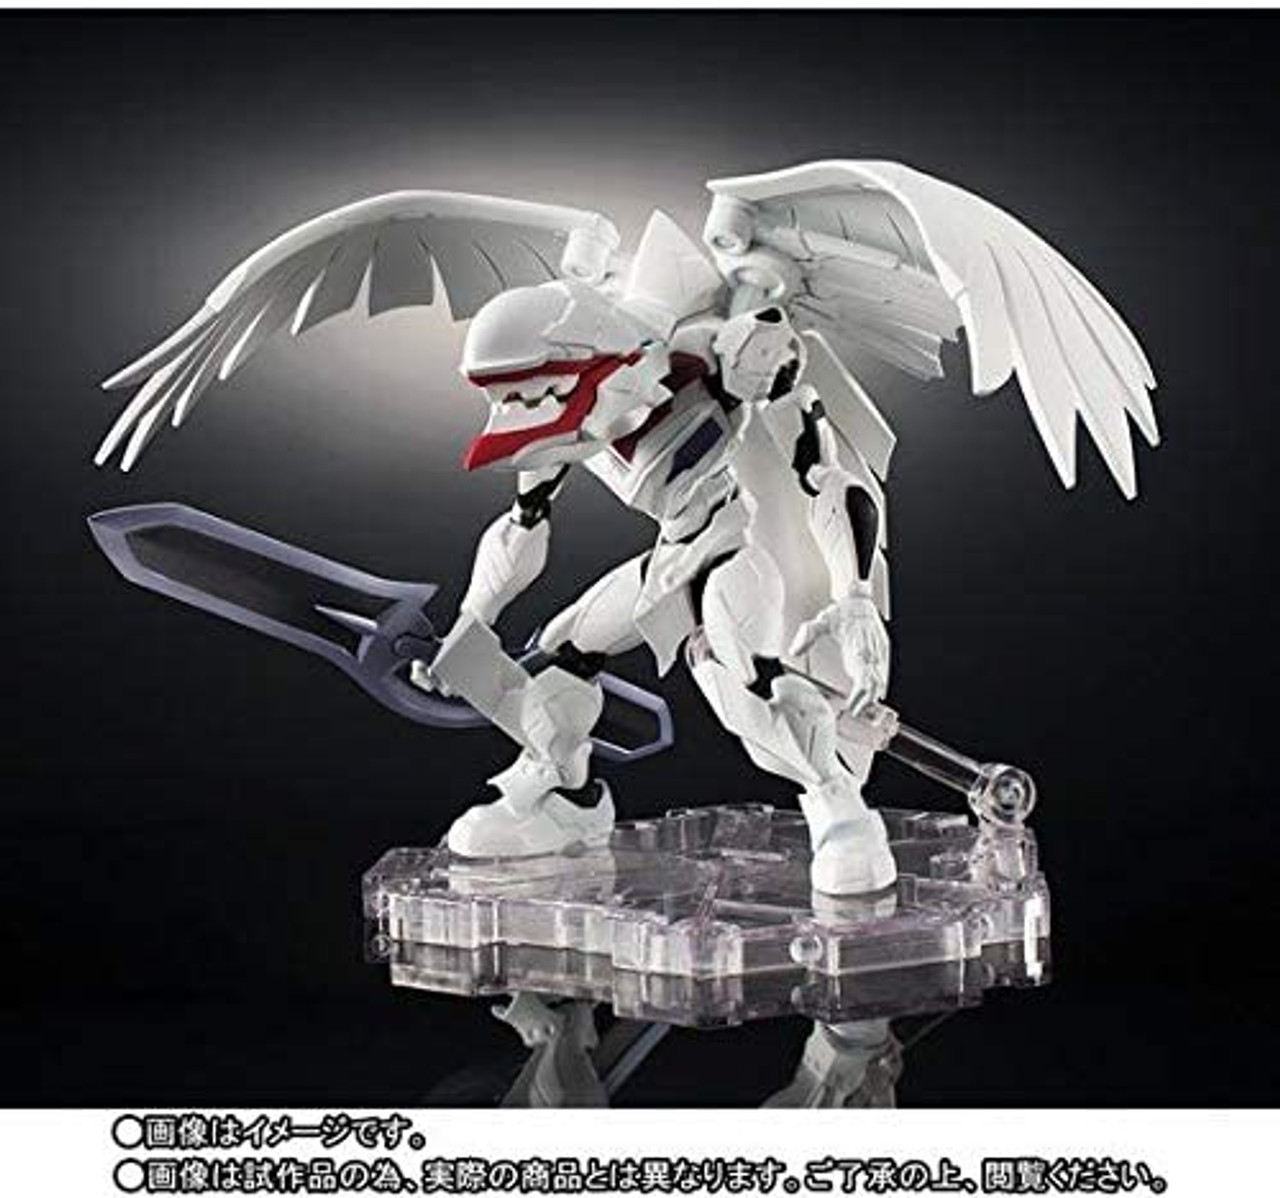  NXEDGE Style EVA Unit Evangelion Mass Production Type
*This is a photo image. Actual product might be slightly different.